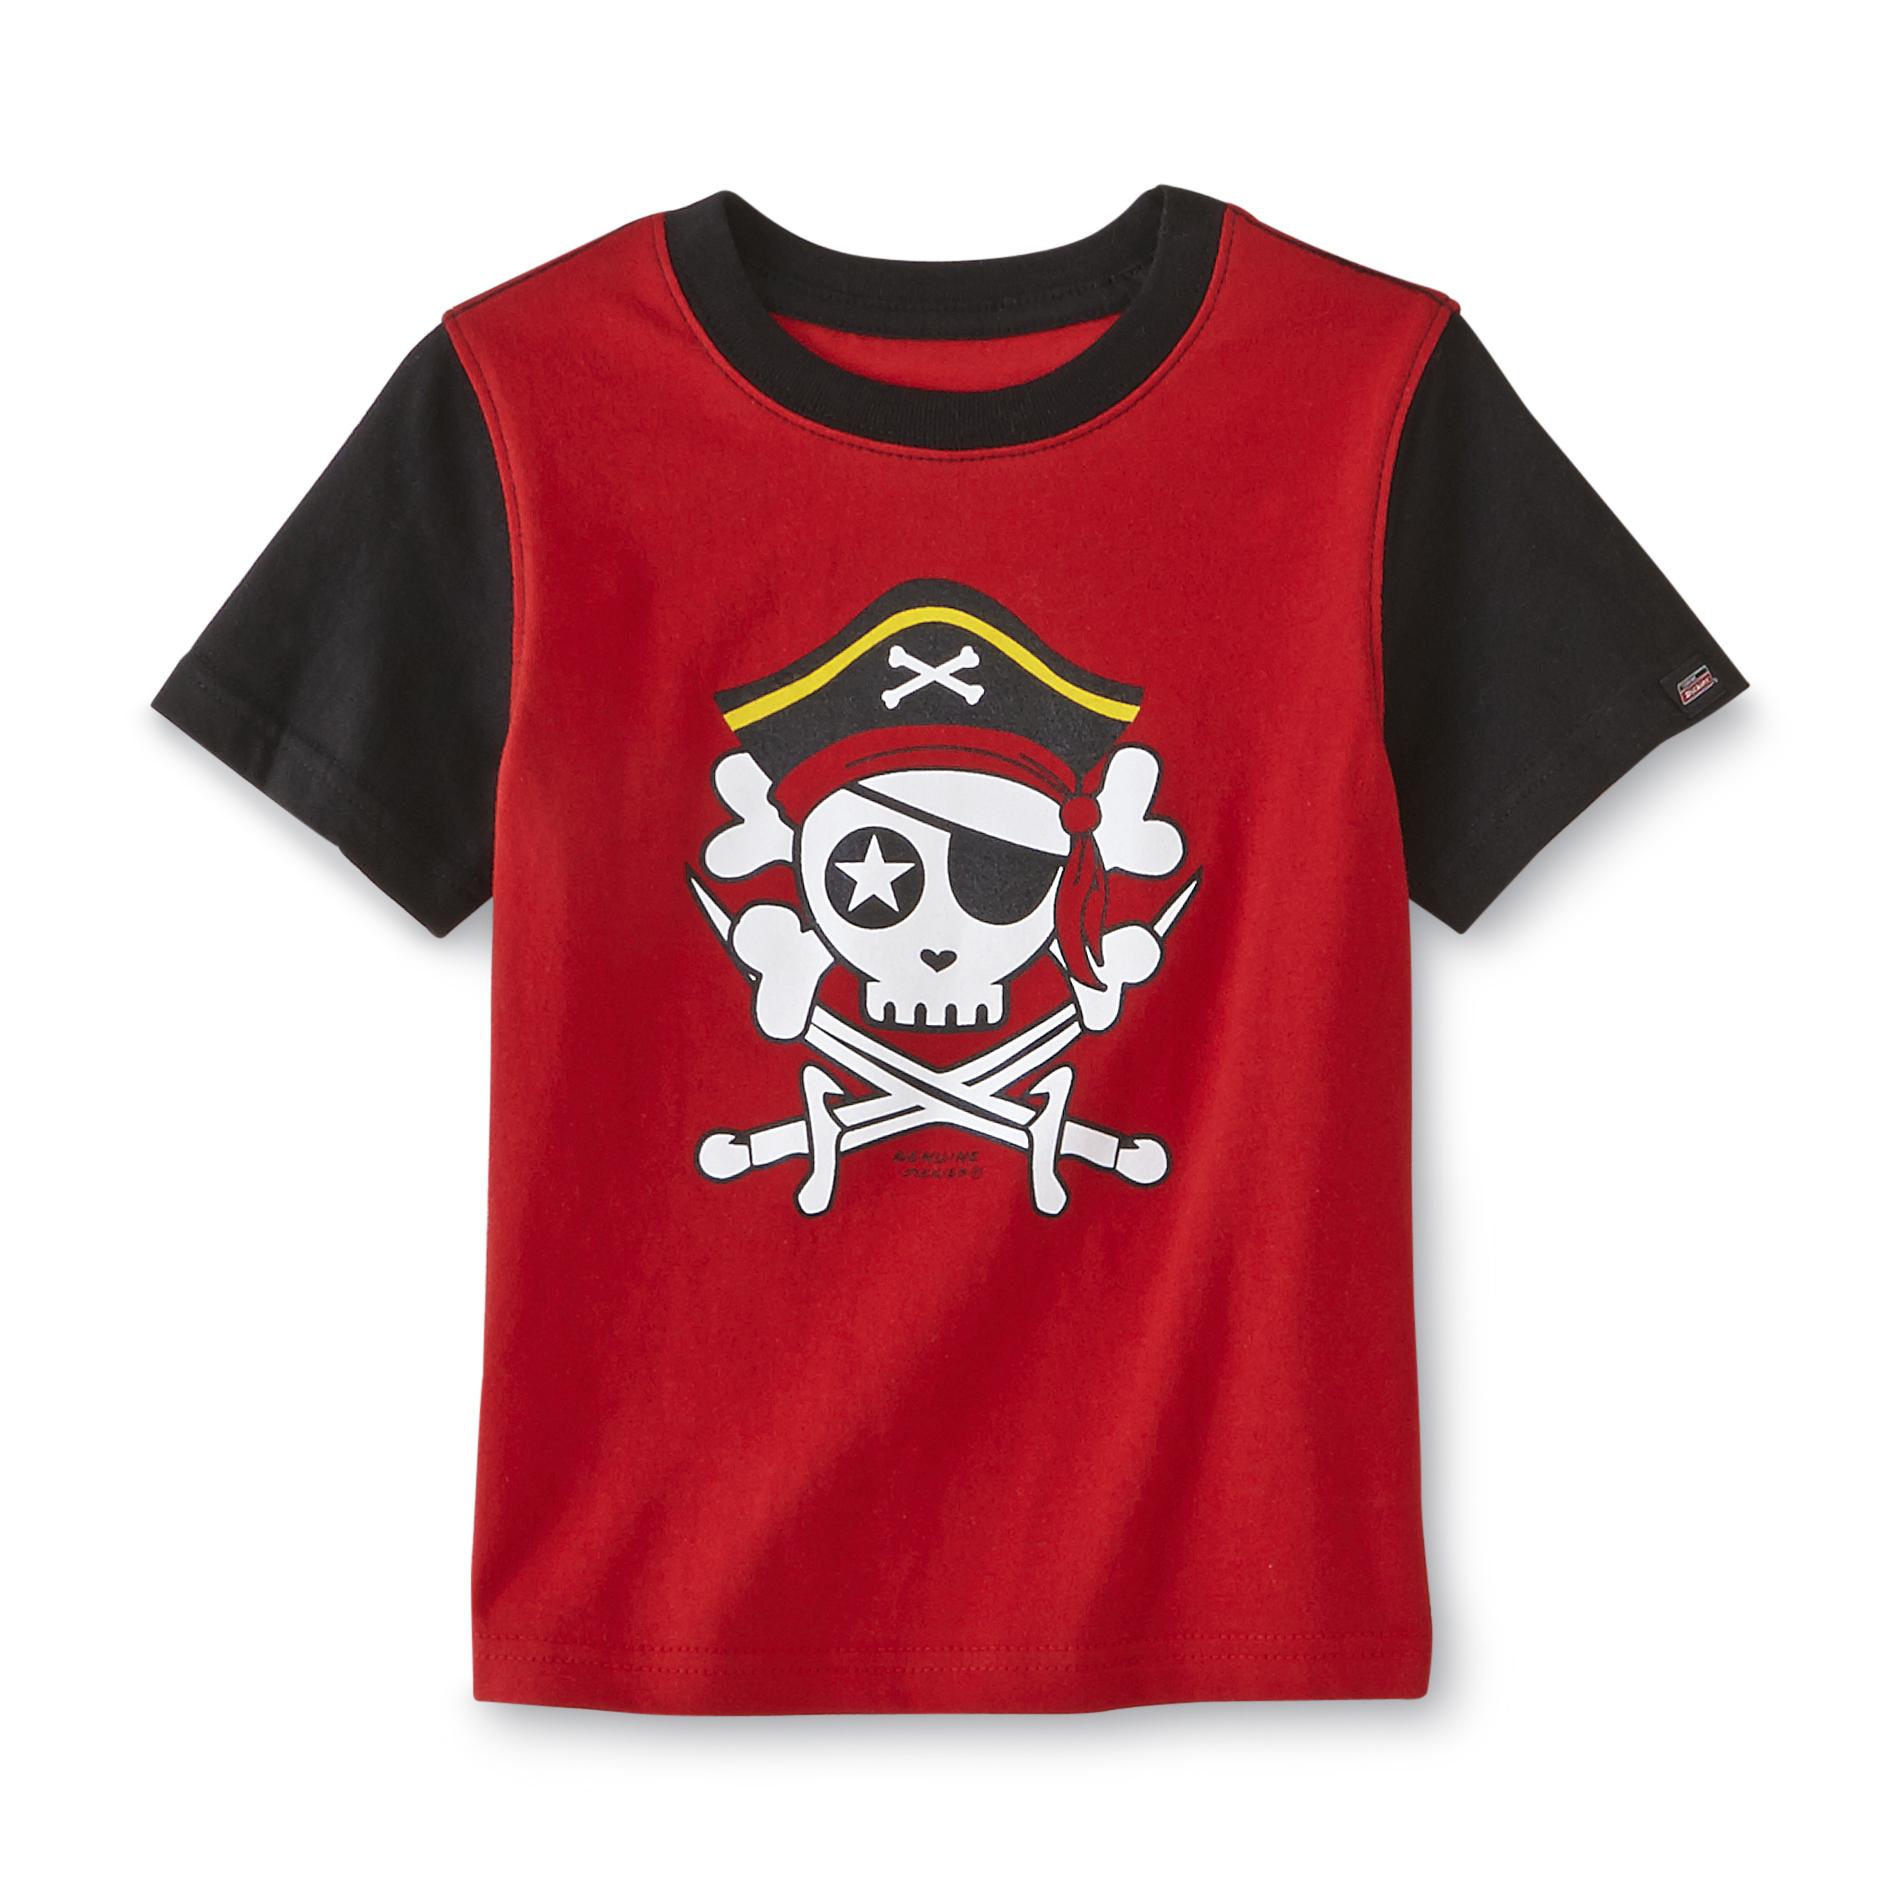 Dickies Infant & Toddler Boy's Graphic T-Shirt - Pirate Skull